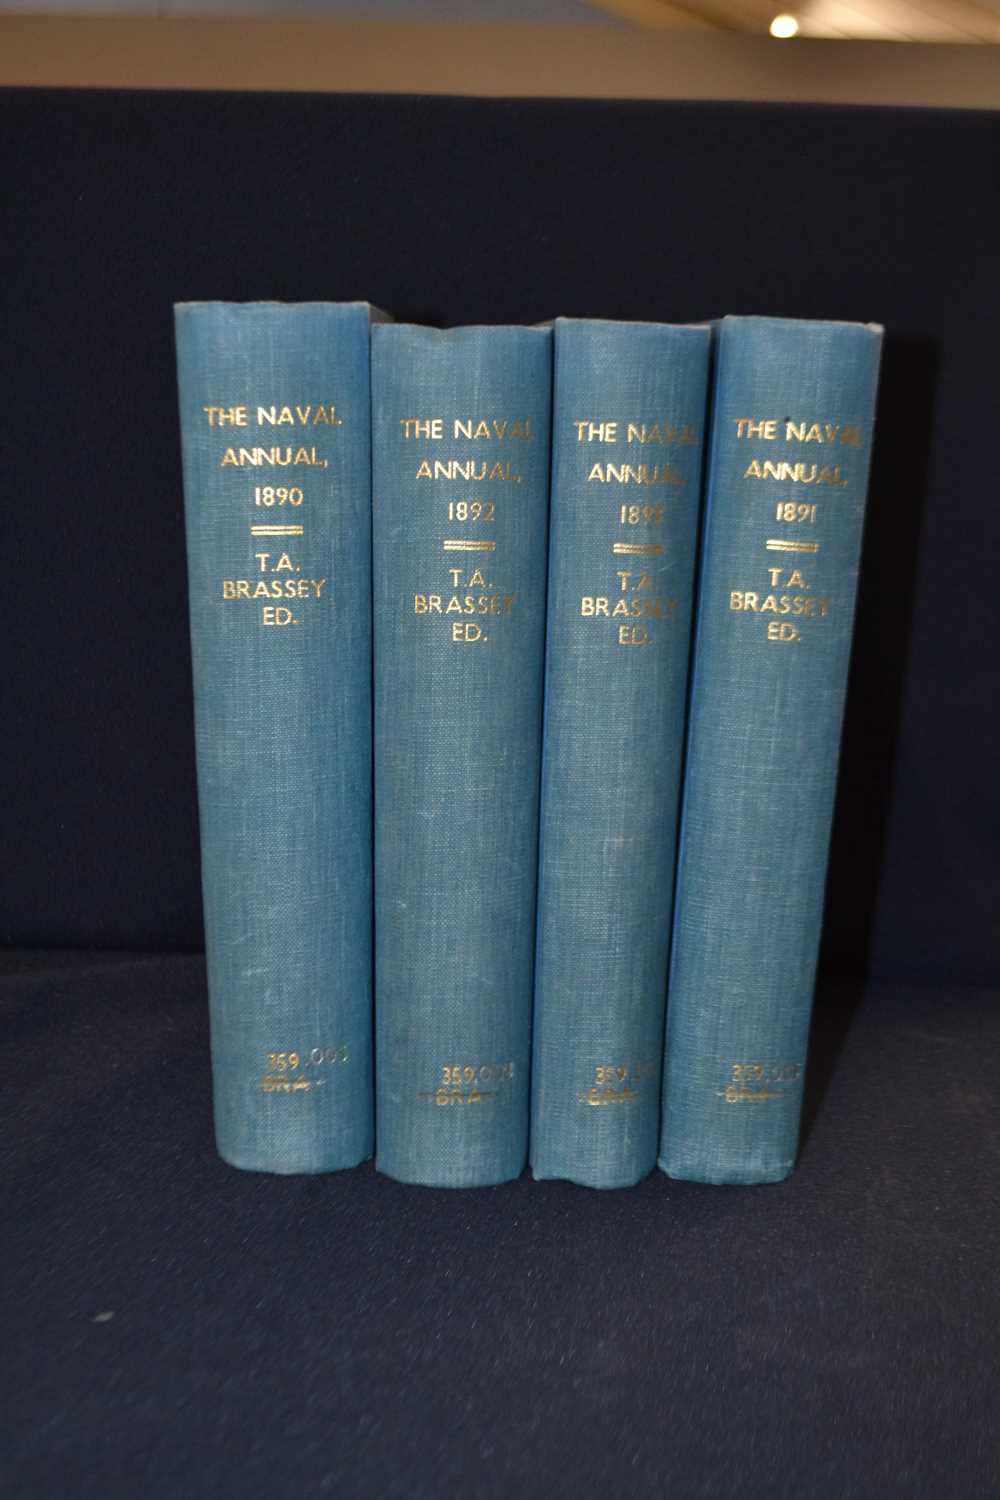 T A BRASSEY: THE NAVAL ANNUAL: 4 volumes, 1890. Ex library in ex library binding. Ffeps removed as